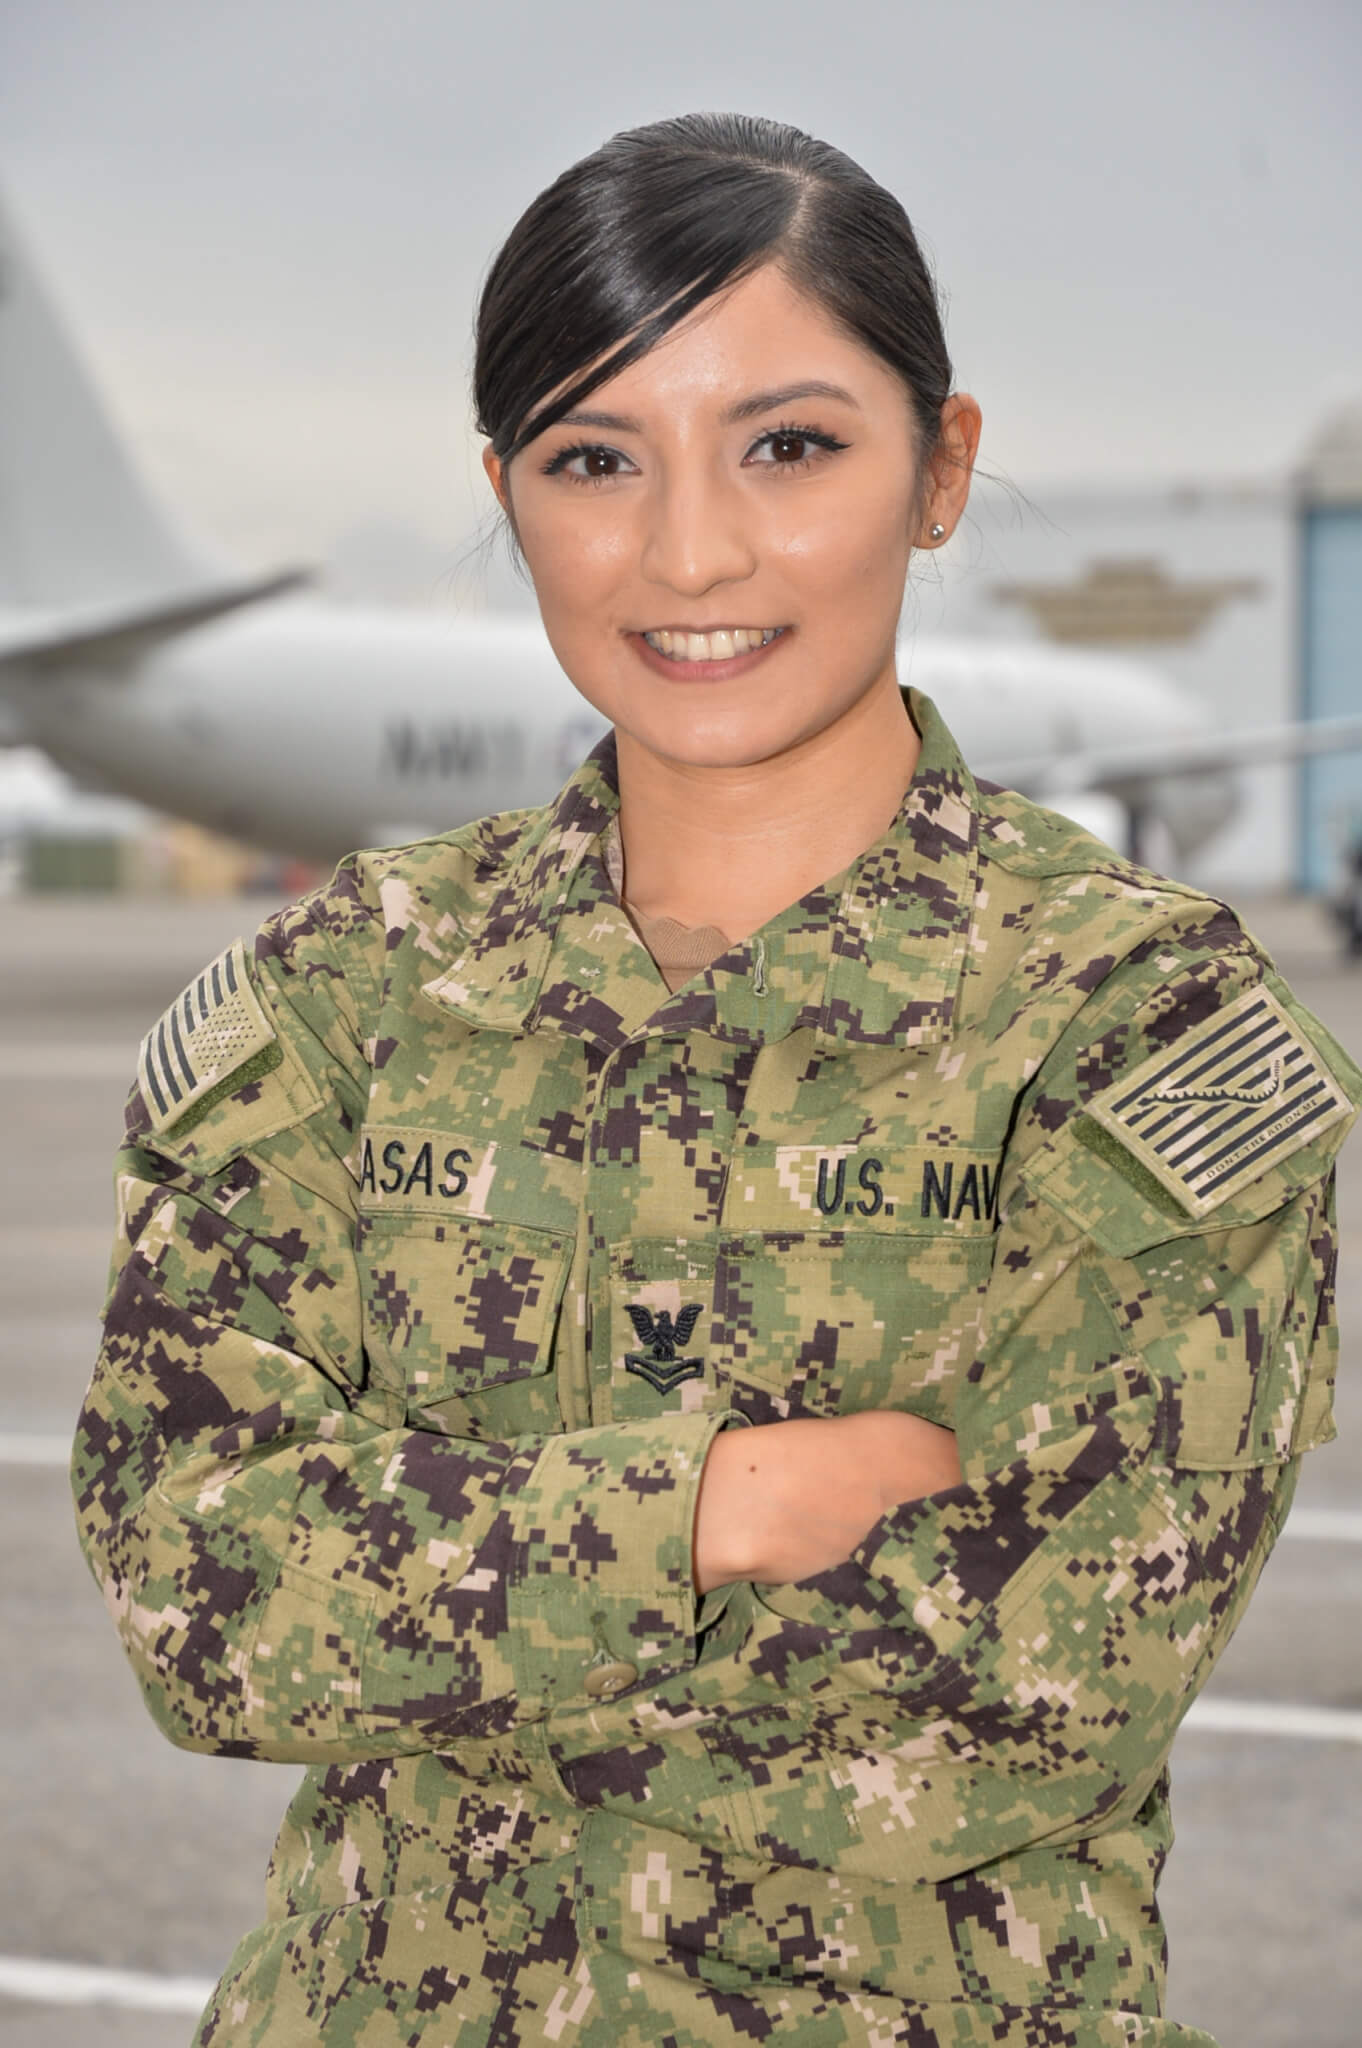  Los Fresnos native serves at Naval Air Station Whidbey Island 